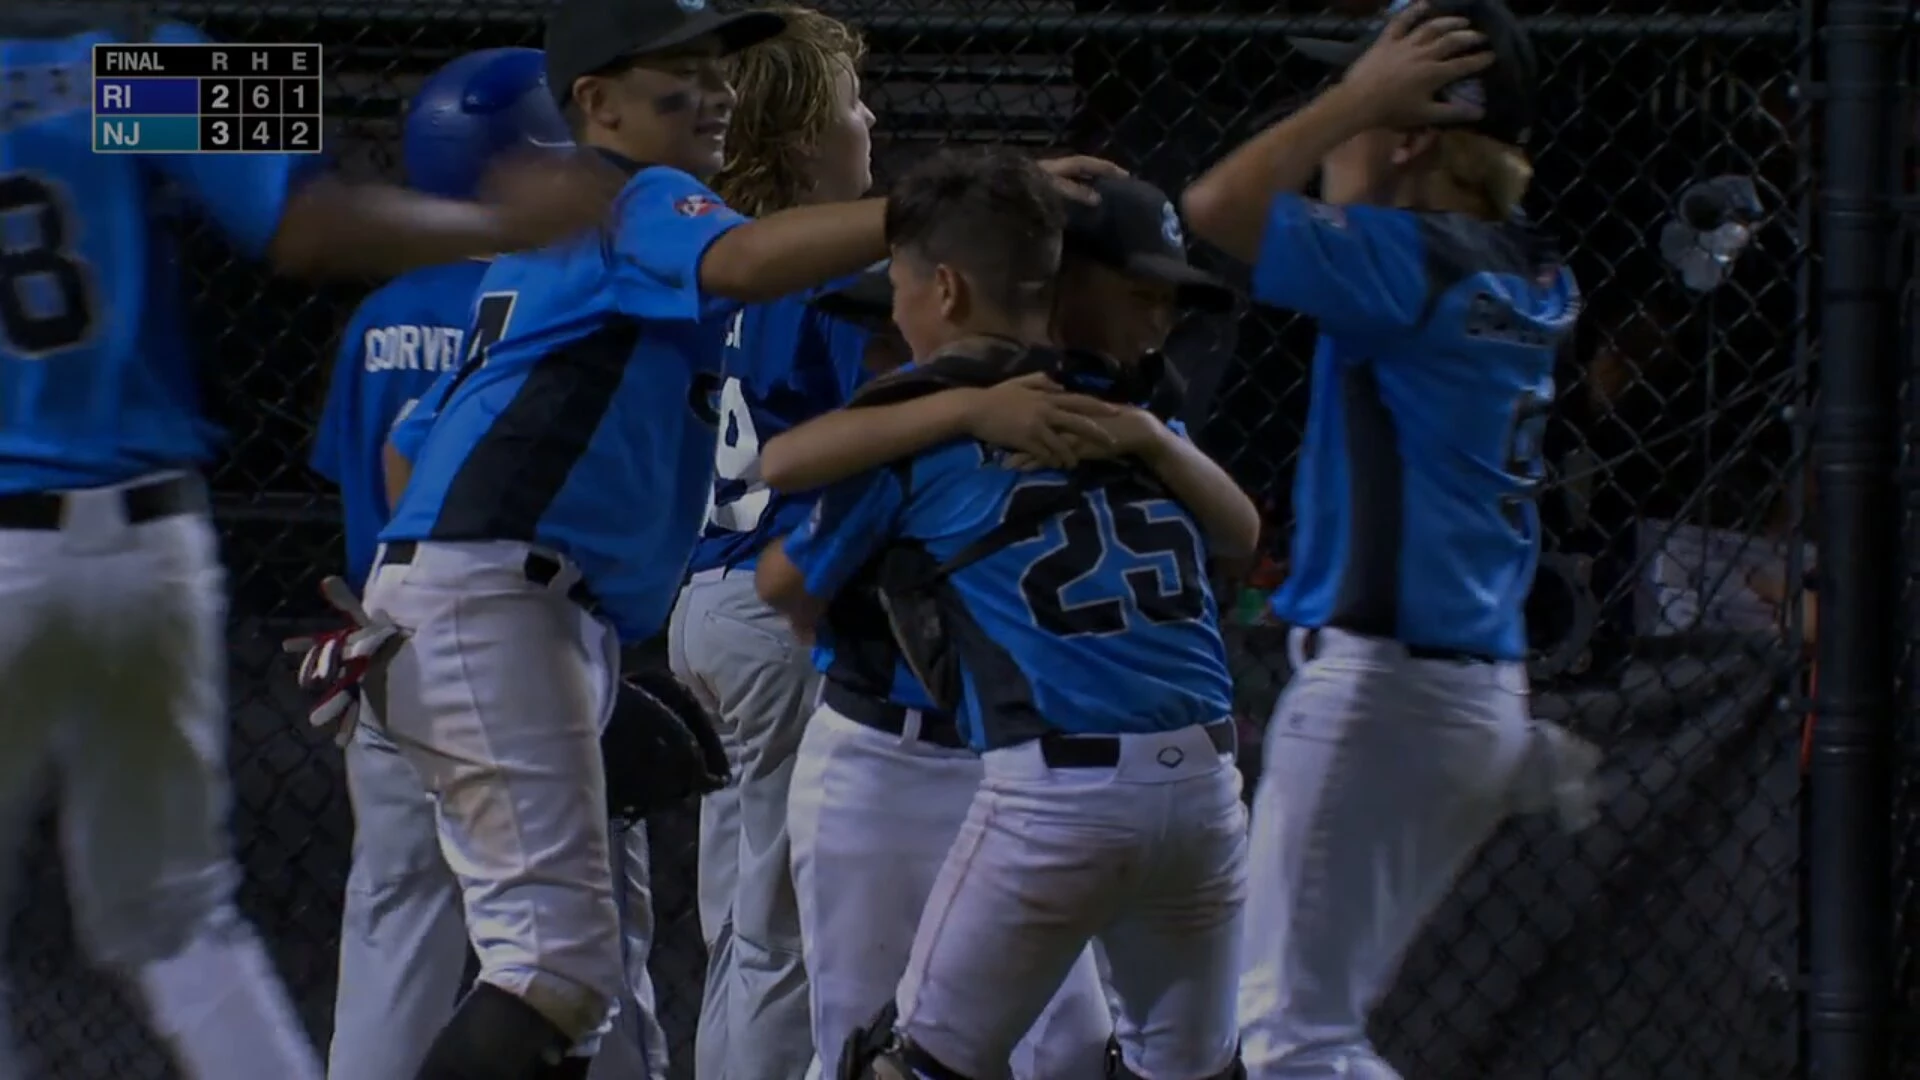 Little League World Series: New Jersey's dream ends with 4-1 loss